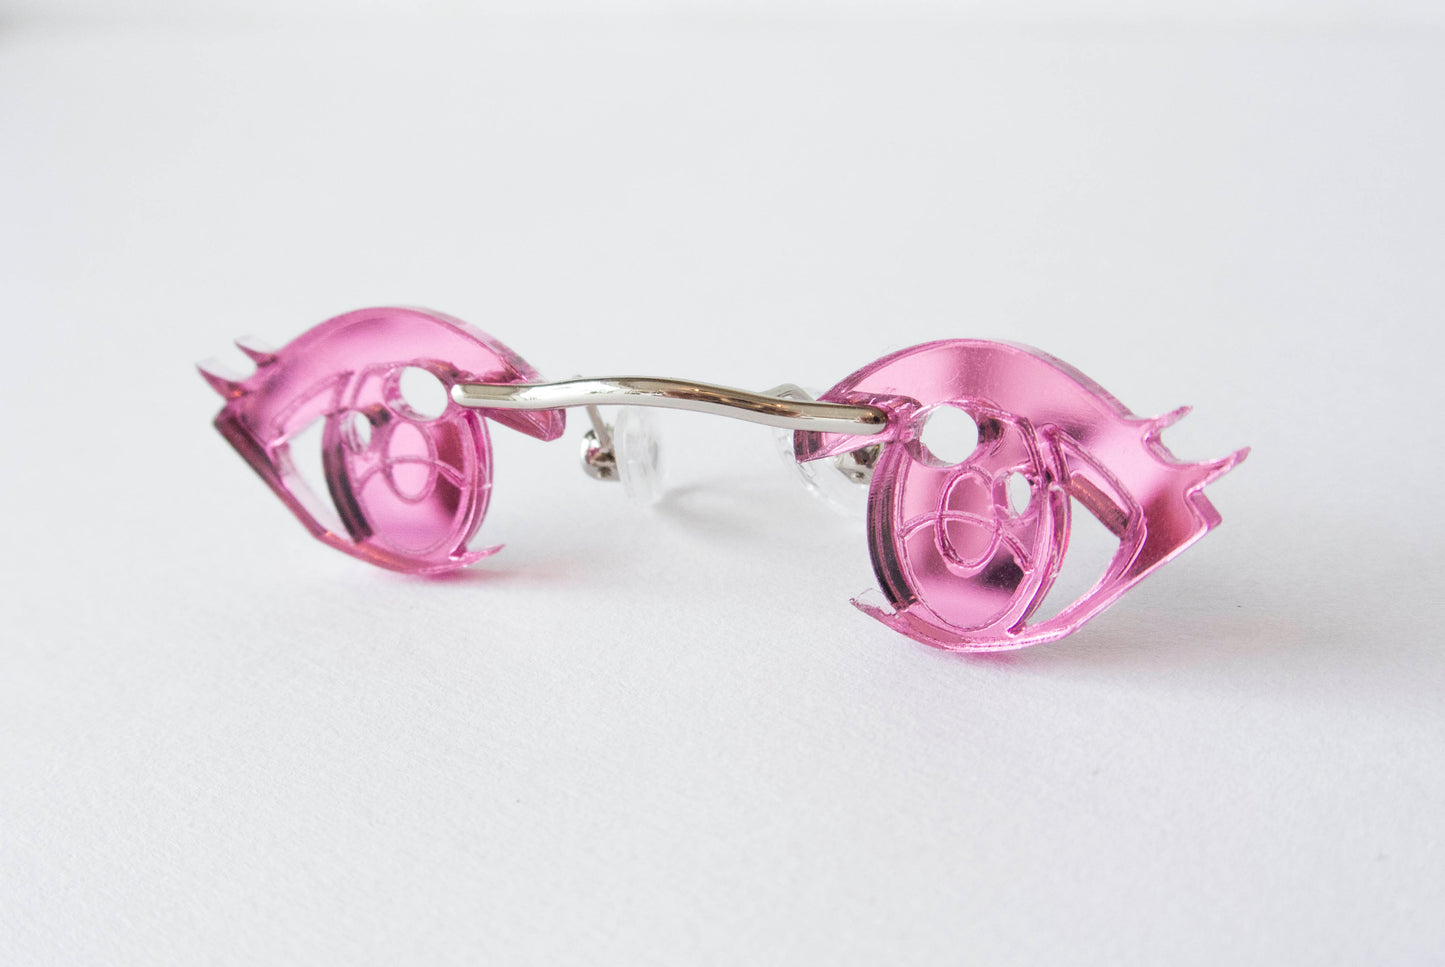 Miniature glasses for your nose in the shape of pink anime eyes